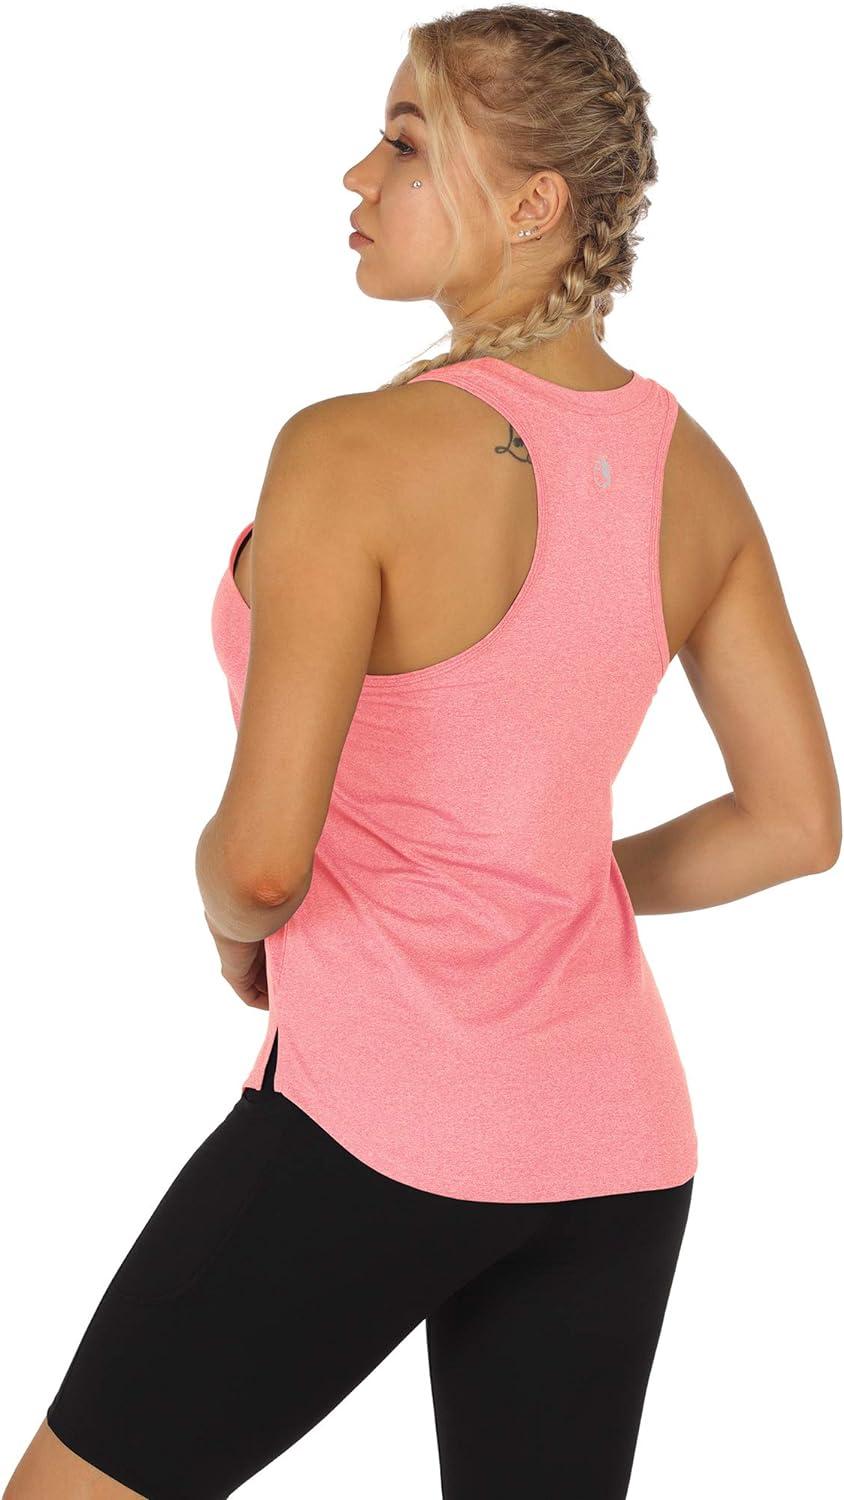 icyzone Women's Racerback Workout Tank Tops - Athletic Yoga Tops Running  Exercise Gym Shirts (Pack of 3) Medium Charcoal/Jade/Hot Pink